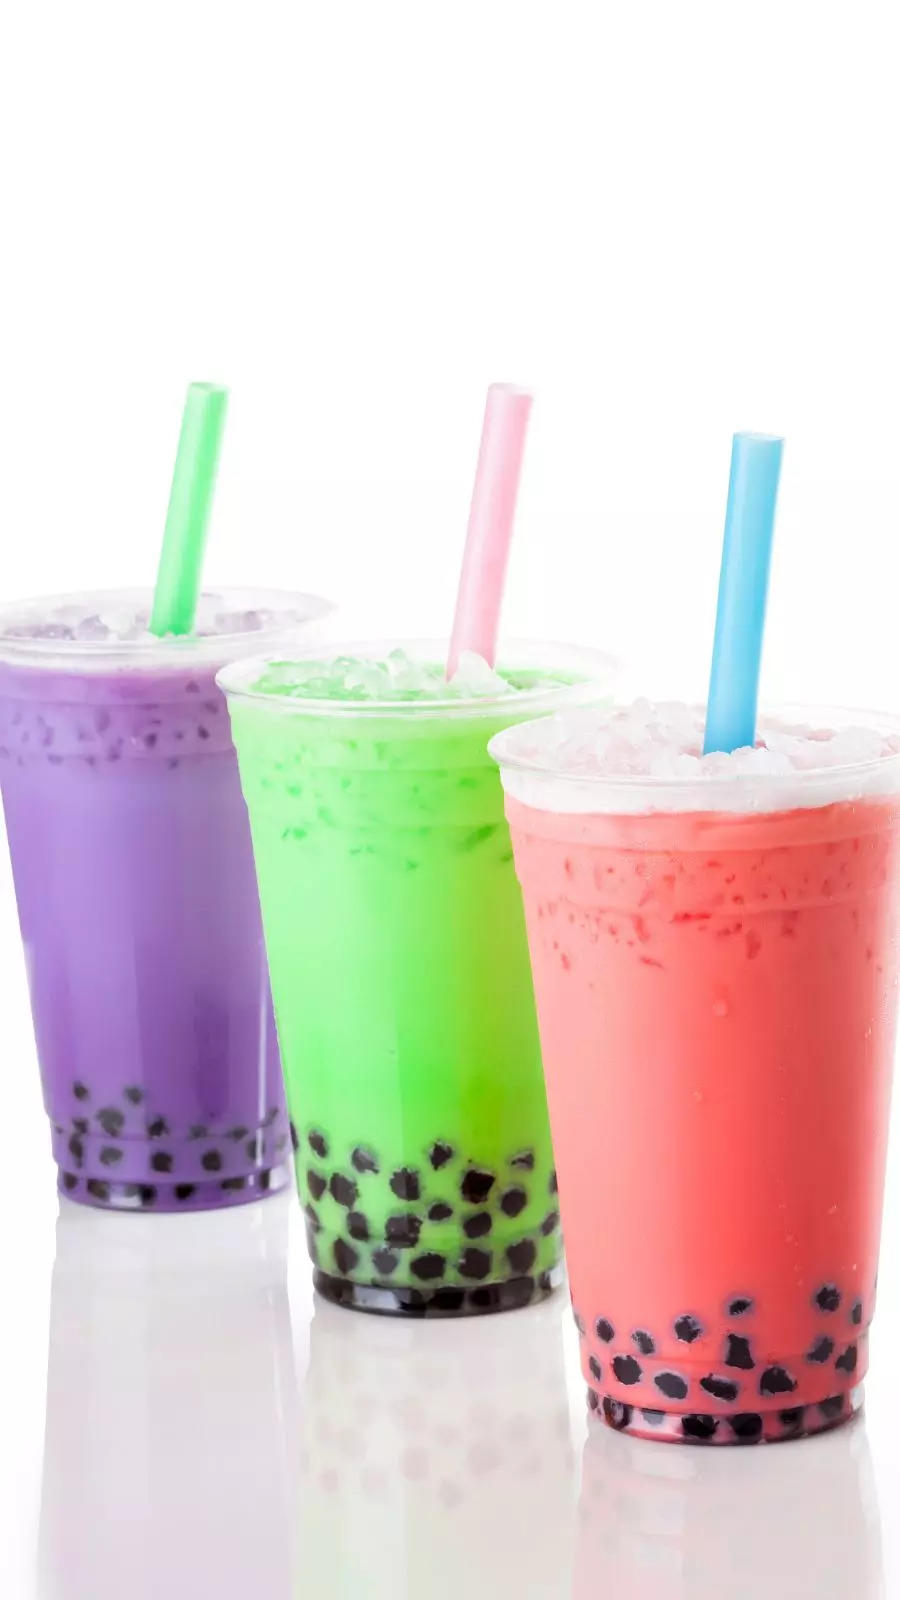 Google Doodle celebrates popular Taiwanese bubble tea with an interactive  game